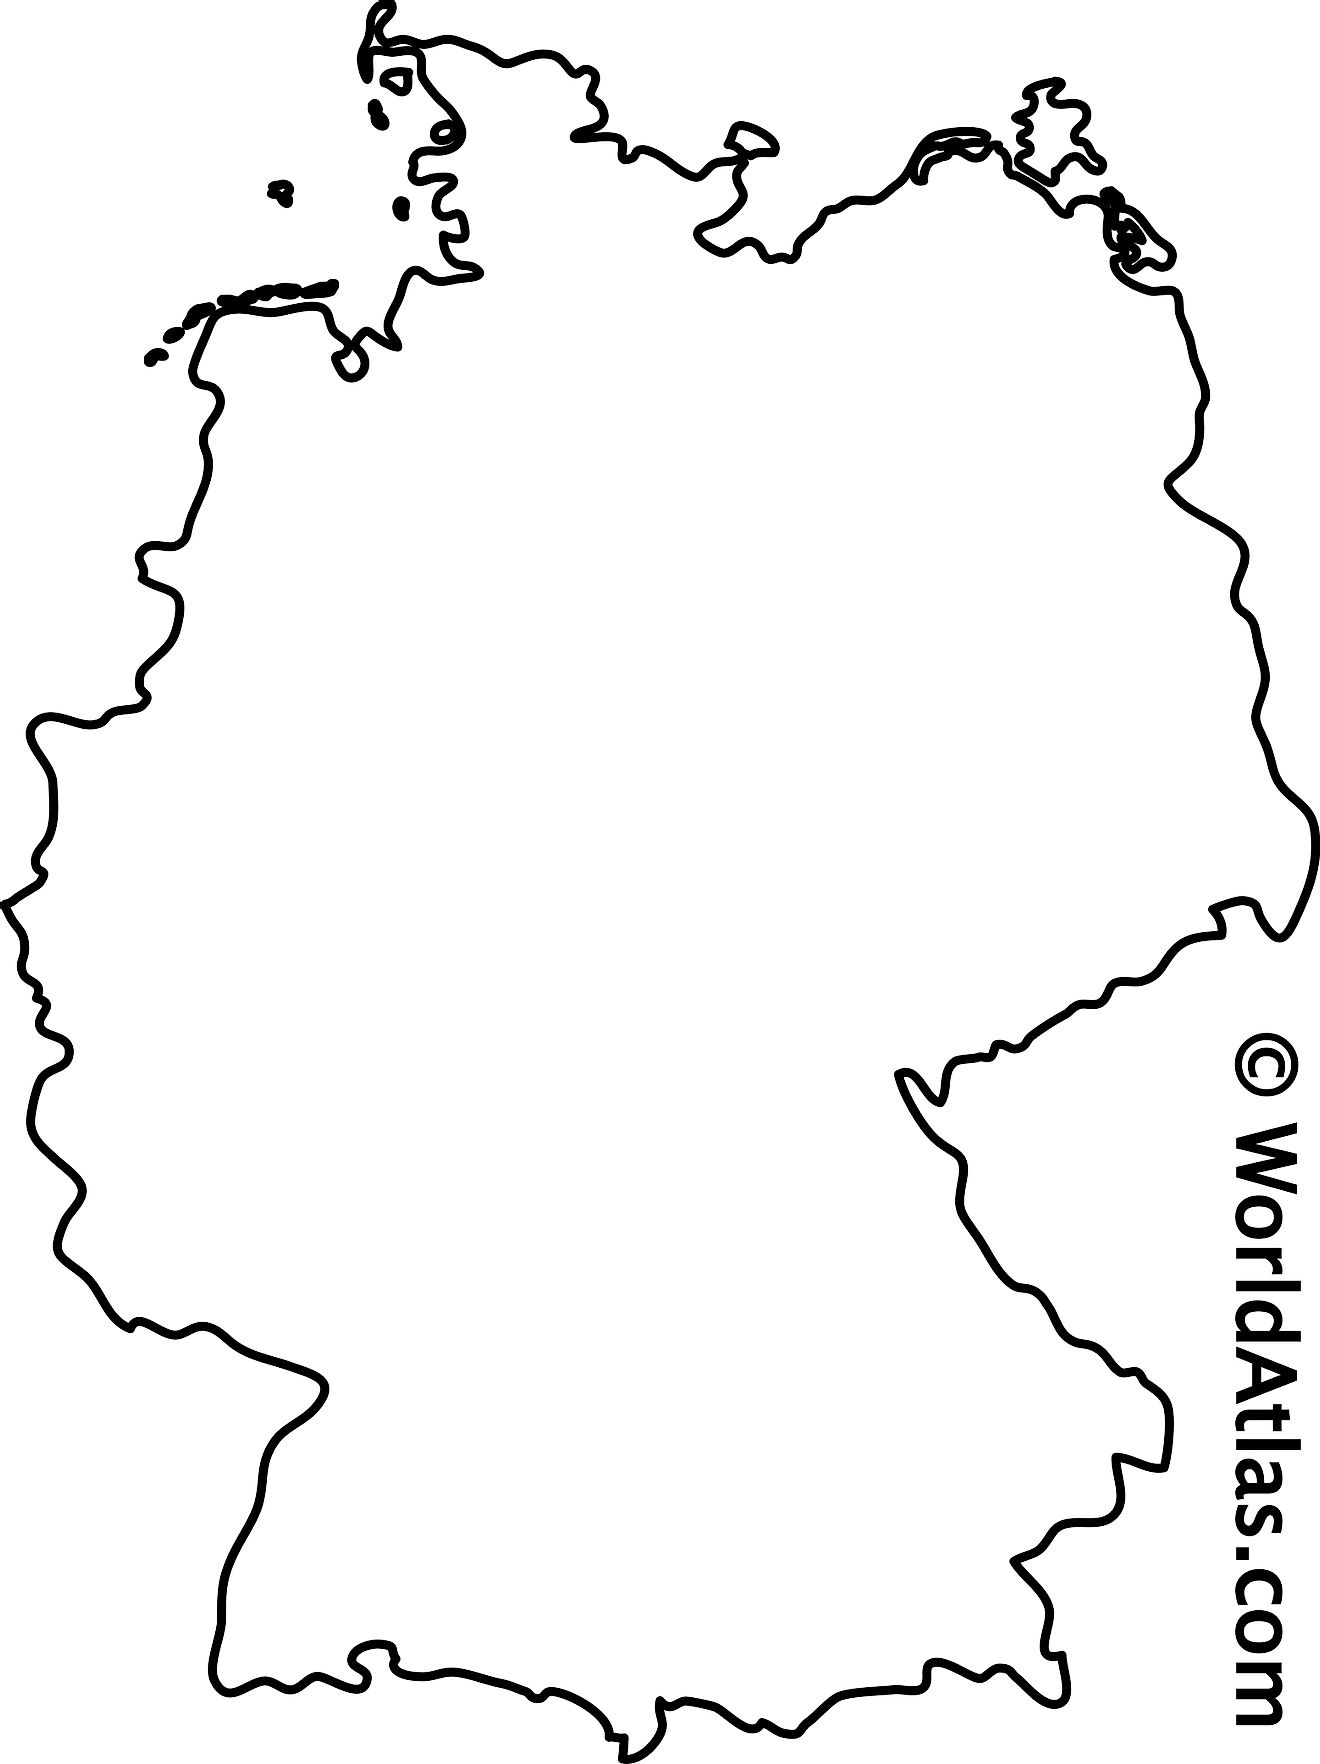 Blank Outline Map of Germany